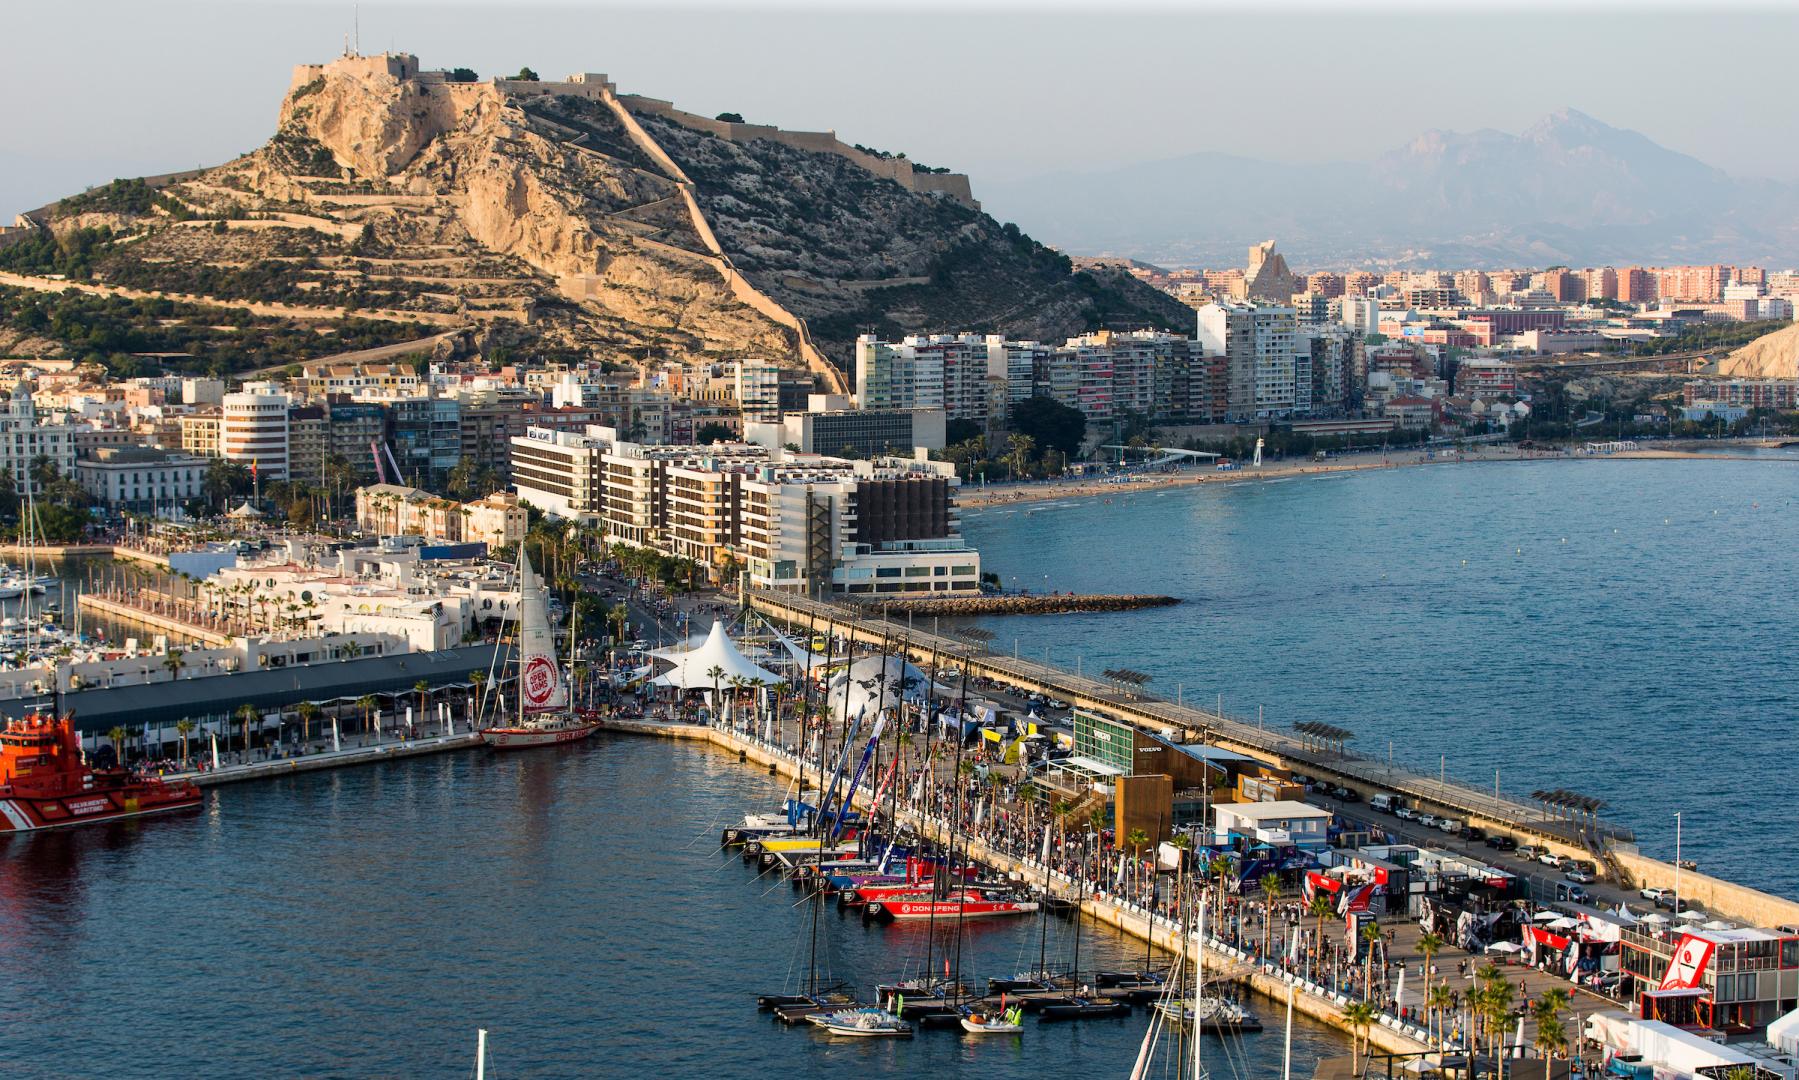 Alicante, Spain is confirmed as final host city for The Ocean Race Europe